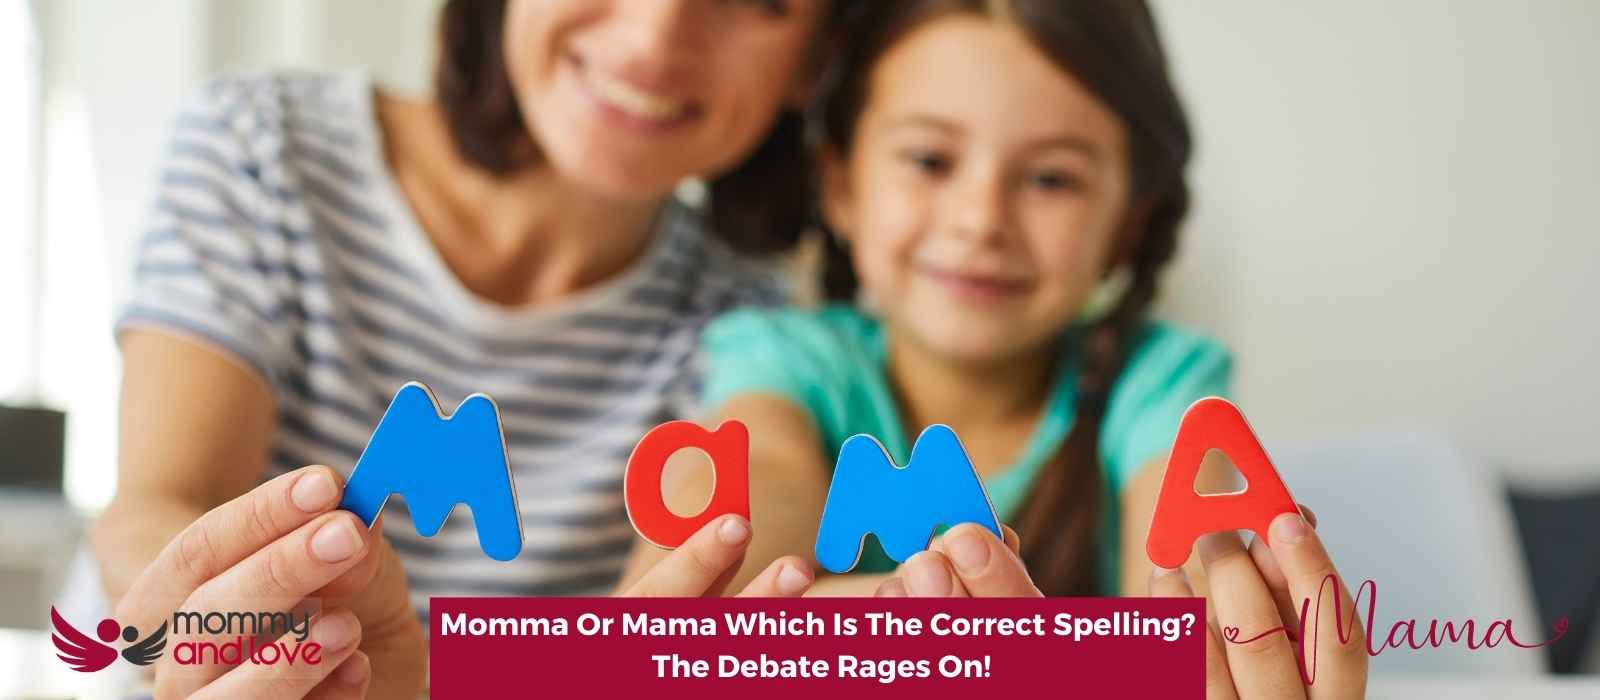 Momma Or Mama Which Is The Correct Spelling The Debate Rages On!